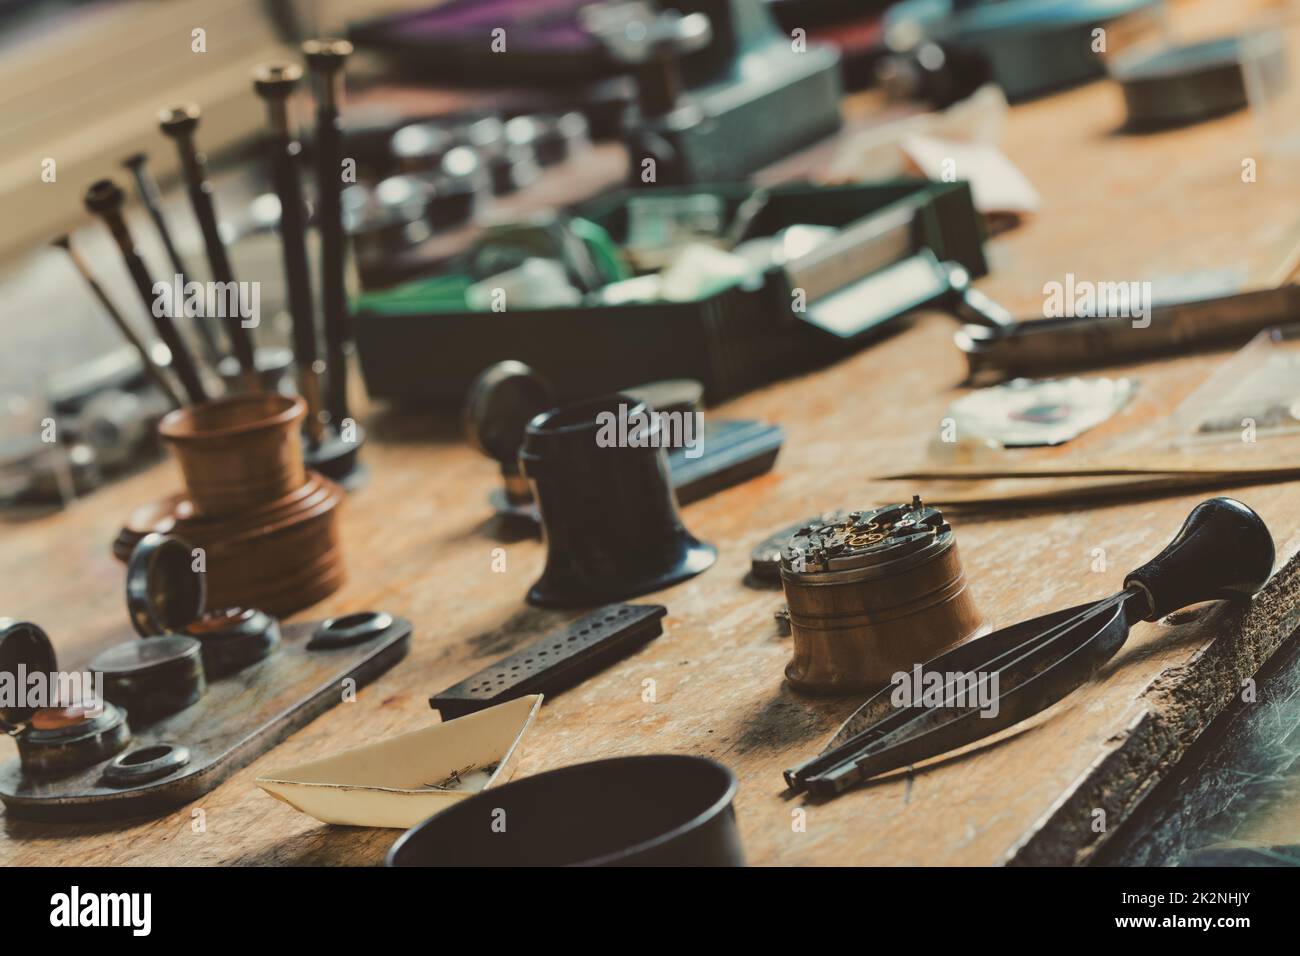 Display of a vintage watchmakers workbench with hand tools Stock Photo